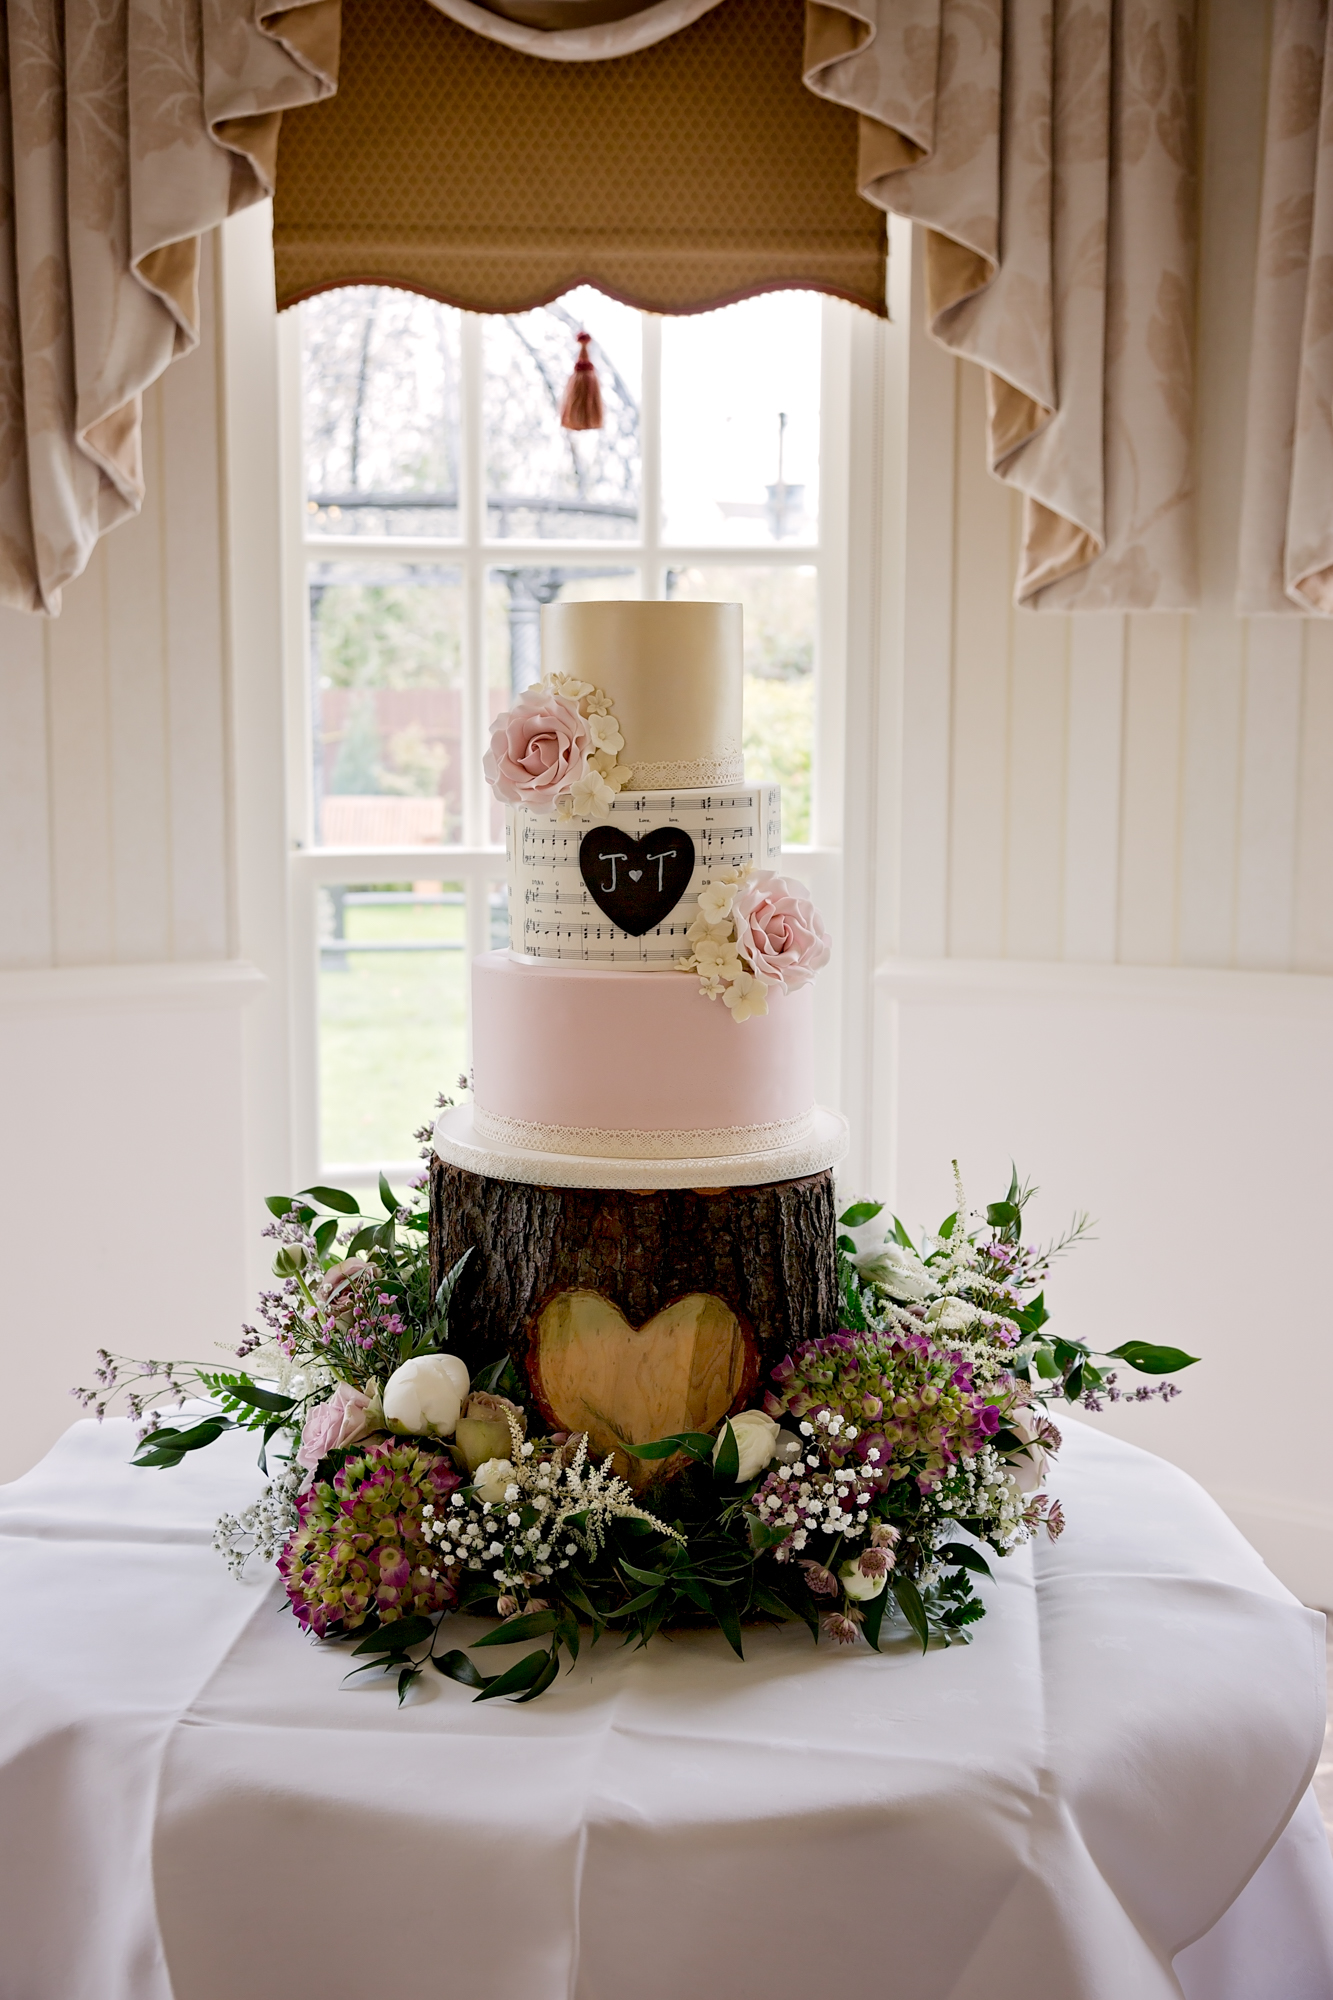 Wedding cake with the cake cwtch at decourceys south wales